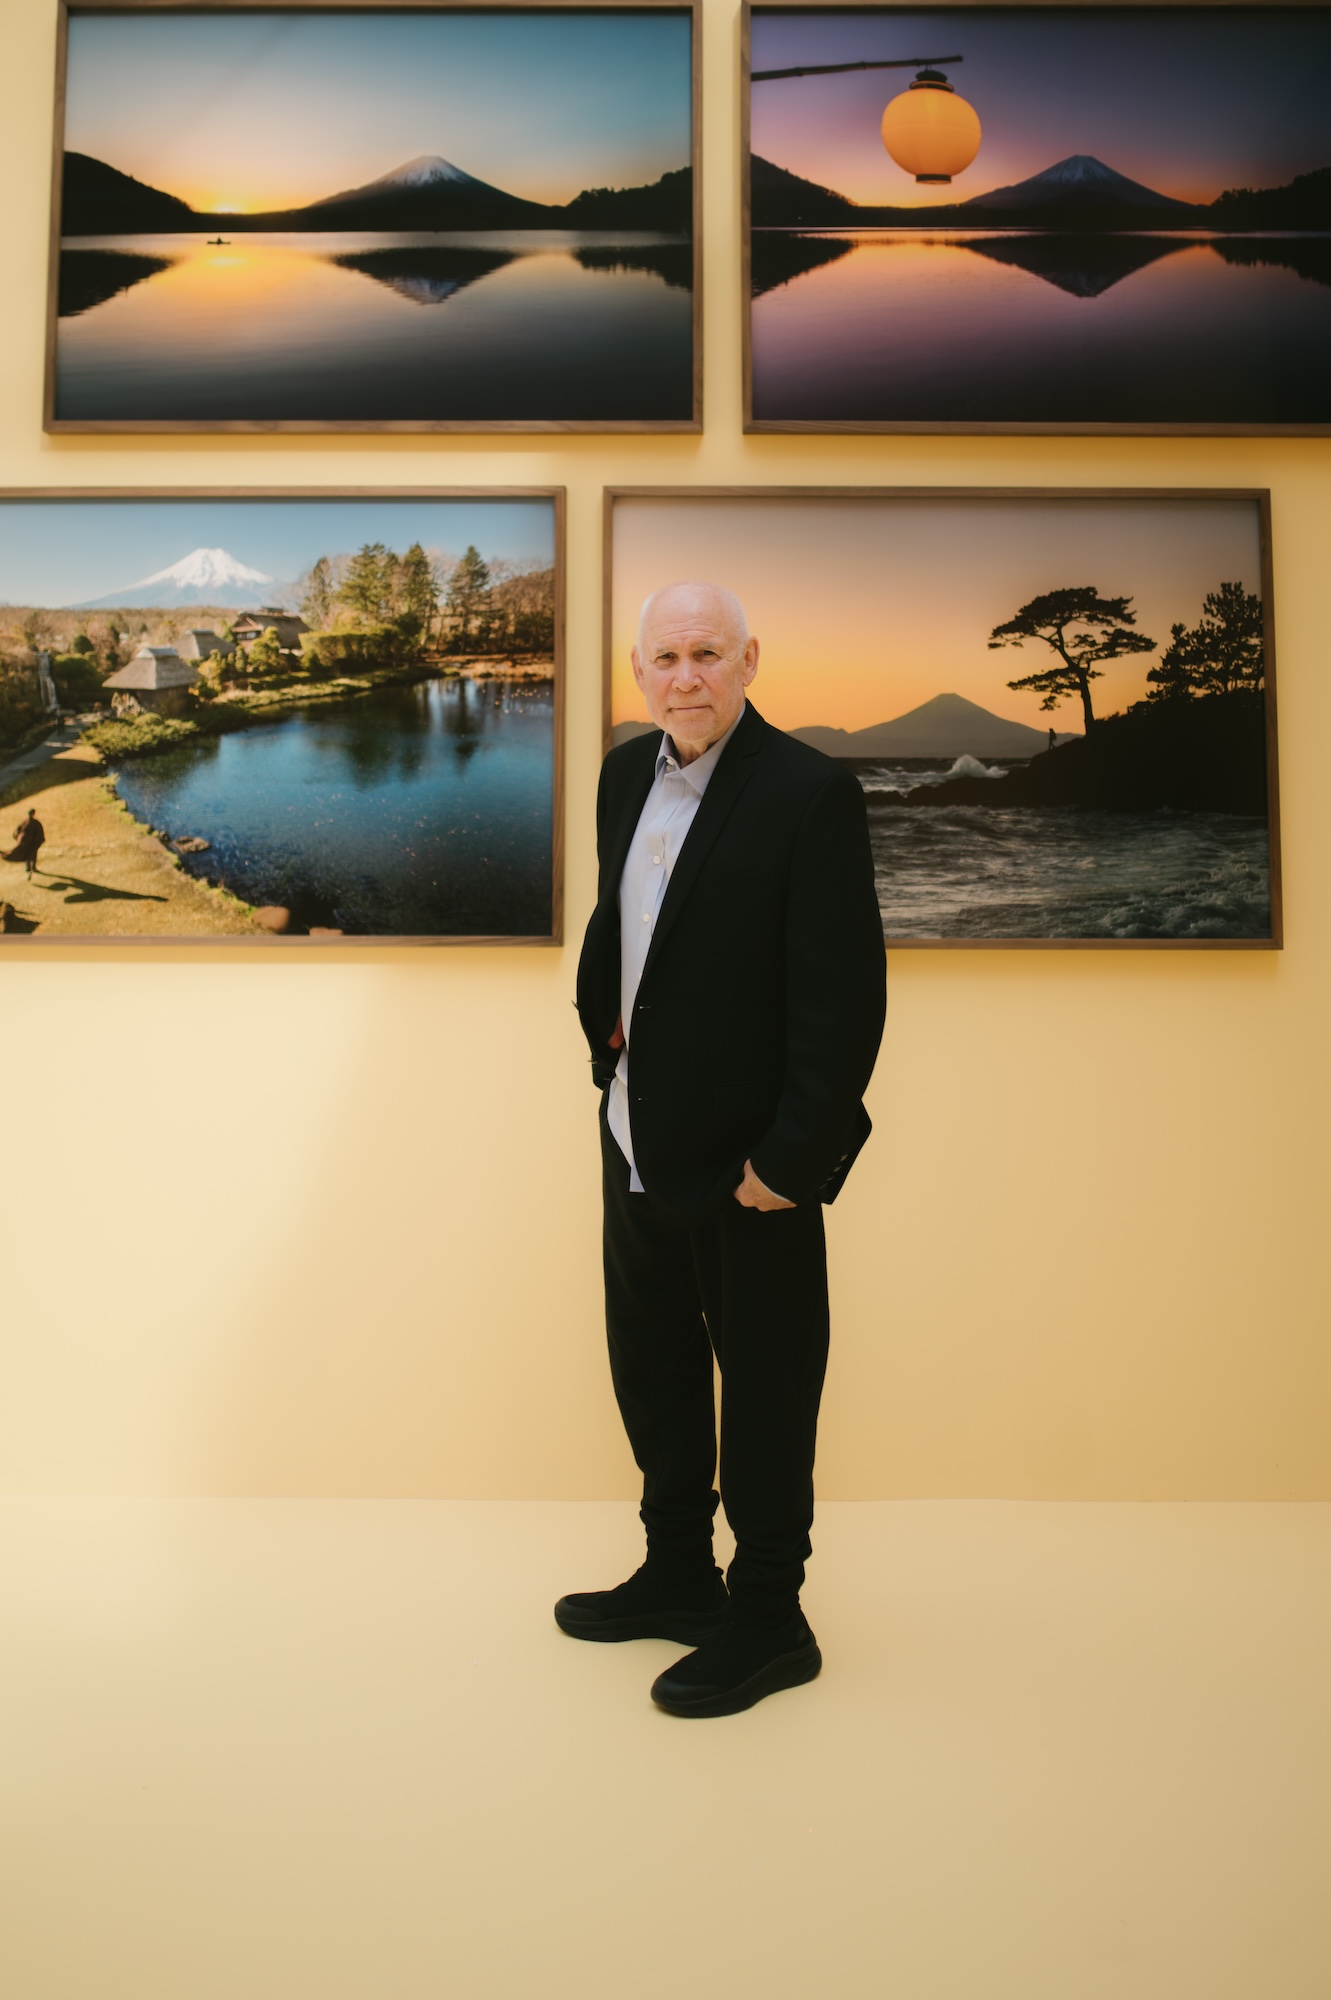 Portrait of Steve McCurry at “Emotions of the Sun” at Milan Design Week